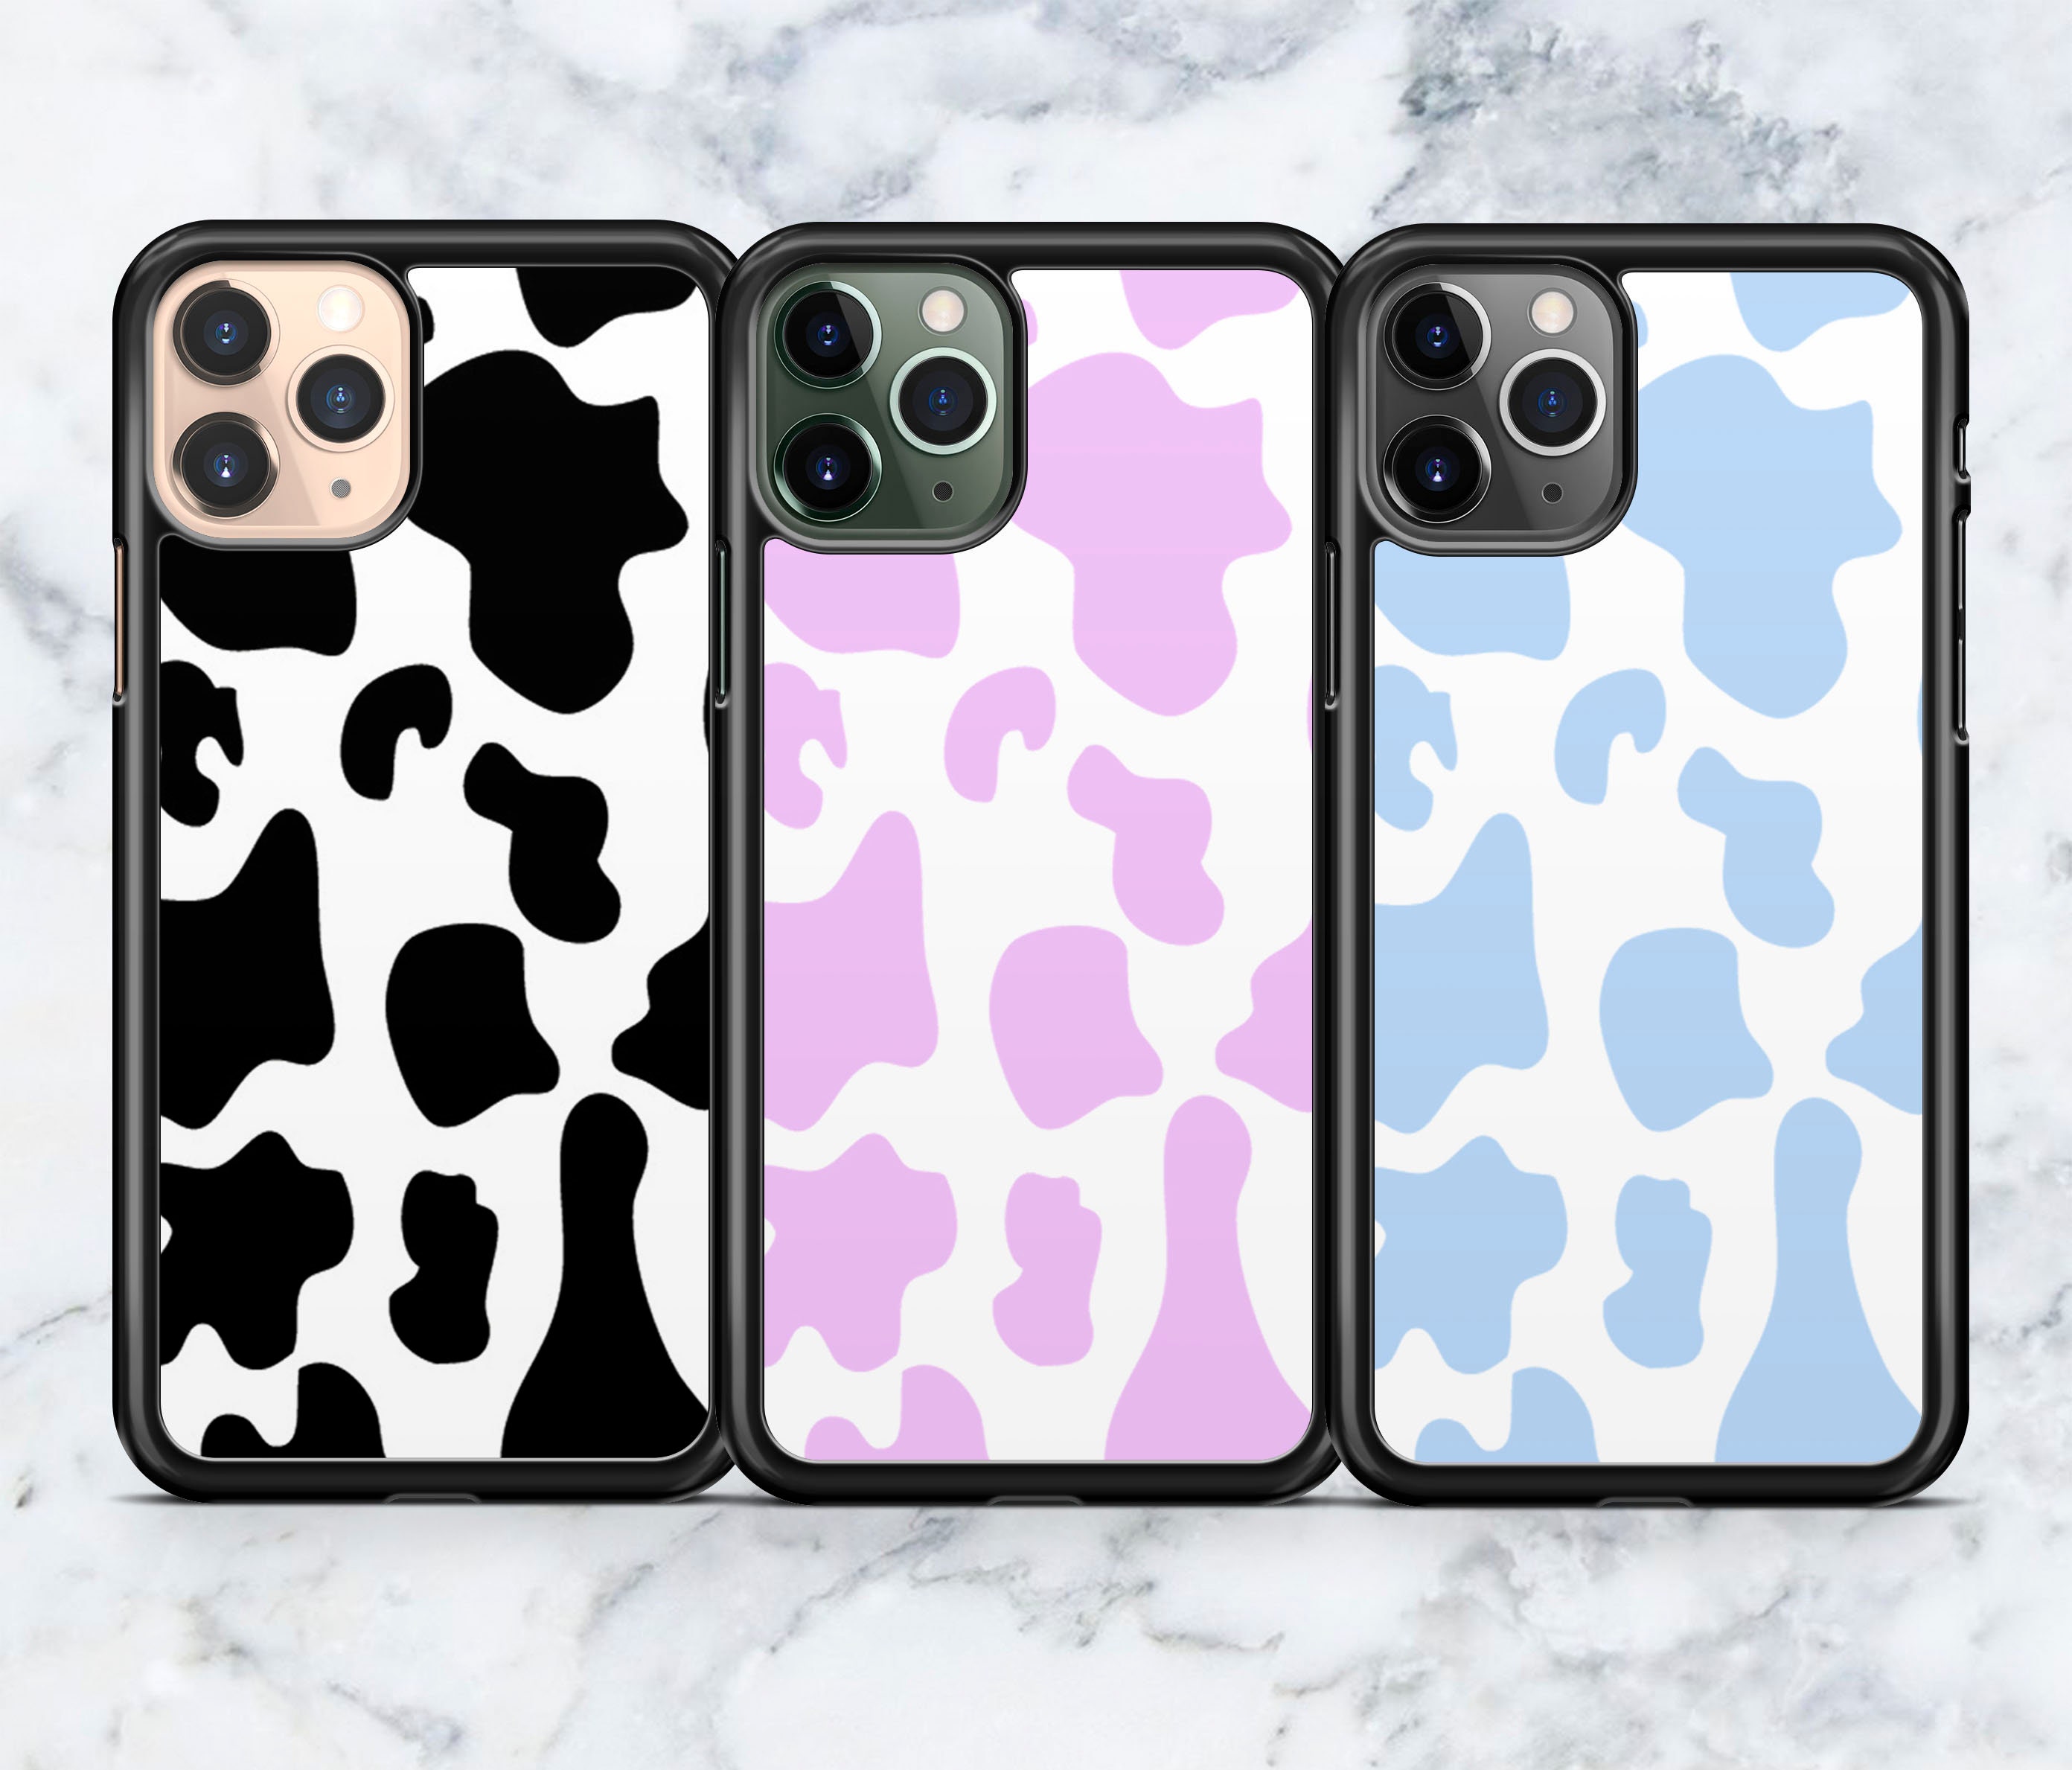 White Black Cow Symbol Pattern Print Phone Case Cover for iPhone 5 5S Se 6 6S 7 8 Plus X Xs Xr Max 11 Pro-Lb1106-For iPhone 8 